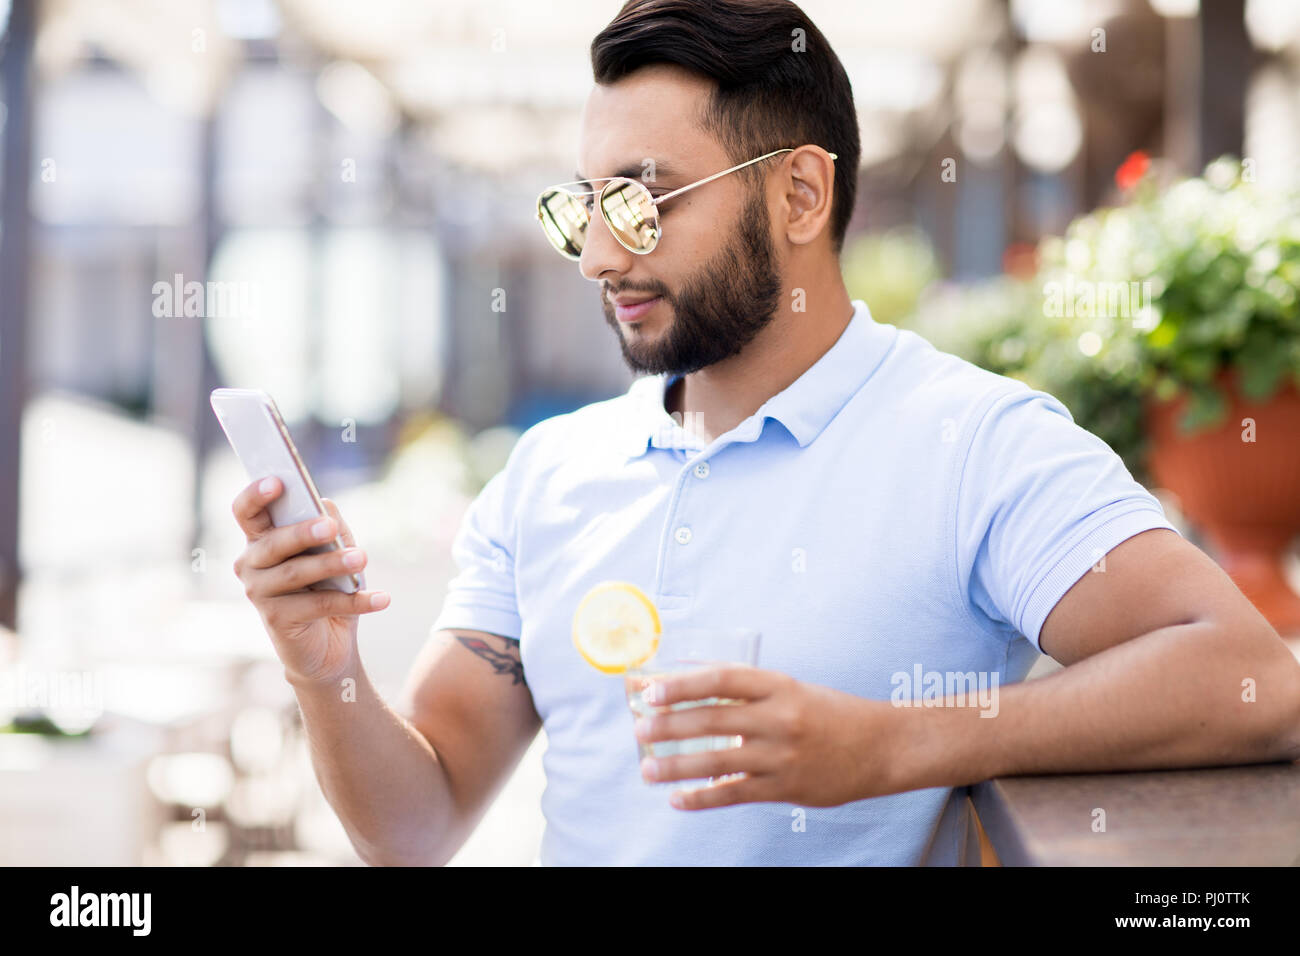 Contemporary Middle-Eastern Man Stock Photo